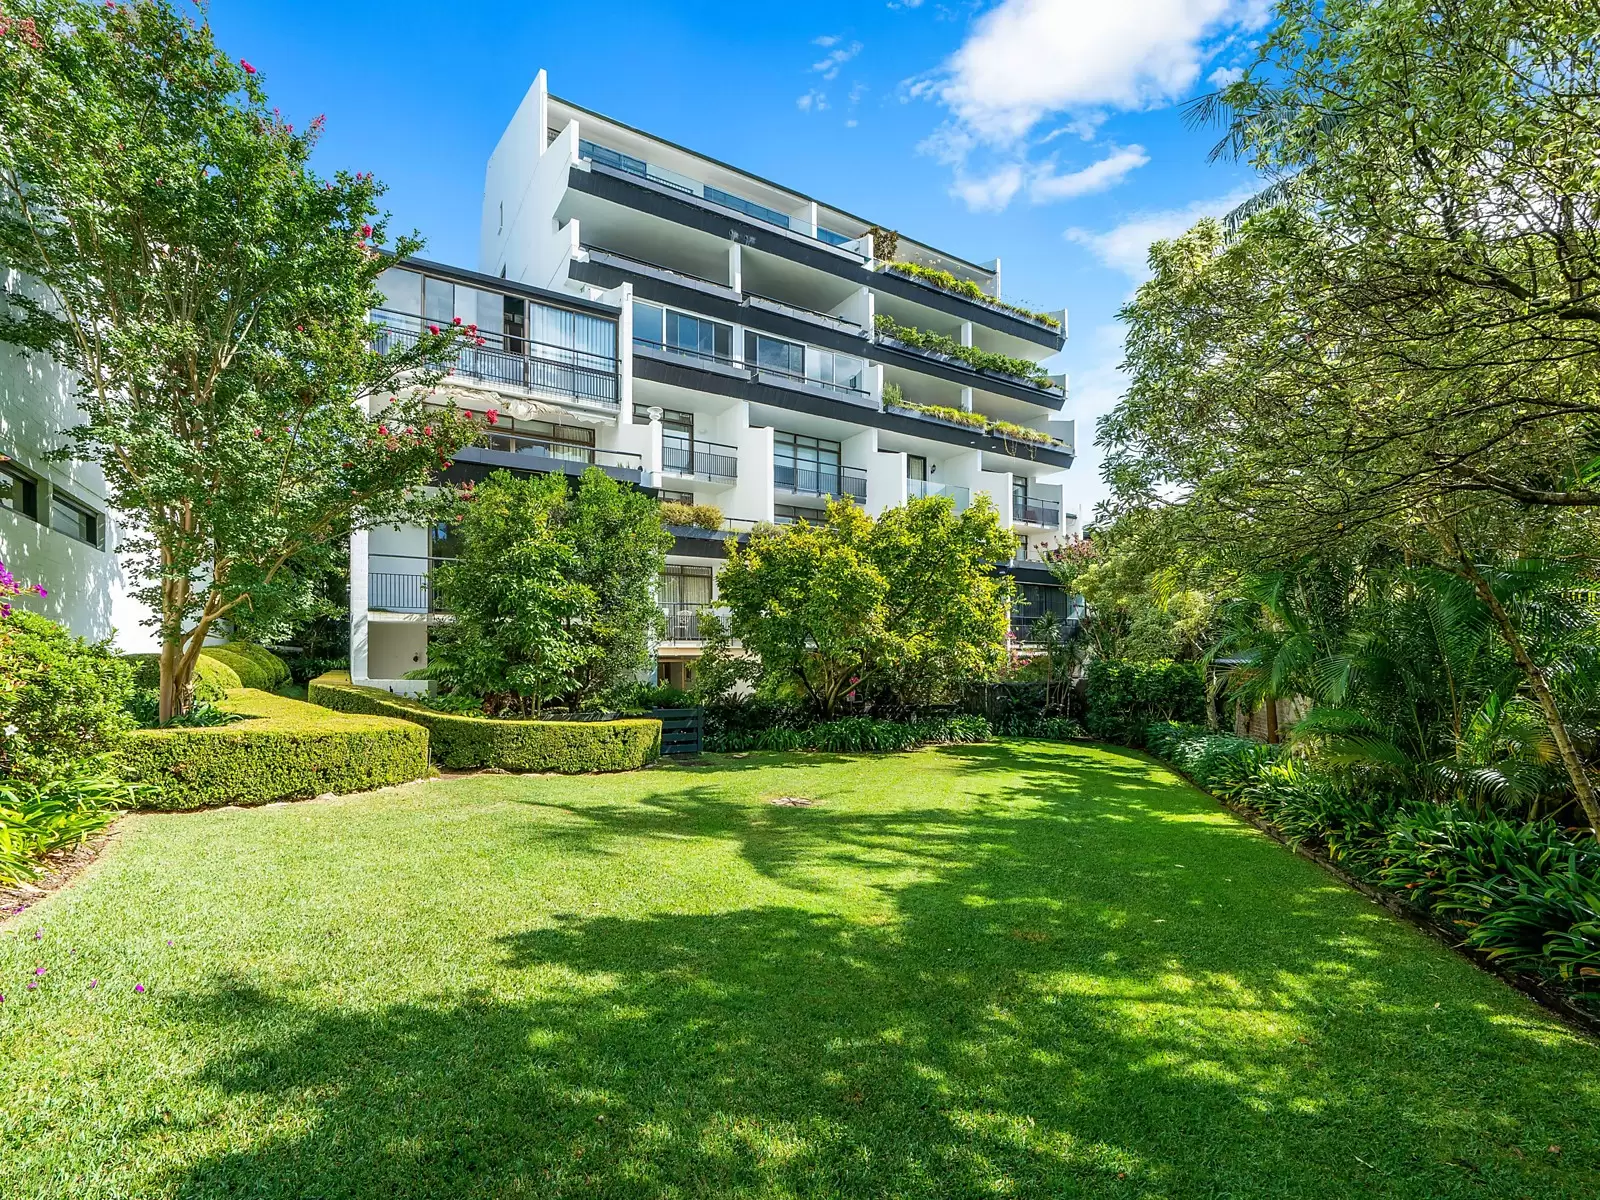 Photo #11: 25/16-18 Rosemont Avenue, Woollahra - Sold by Sydney Sotheby's International Realty